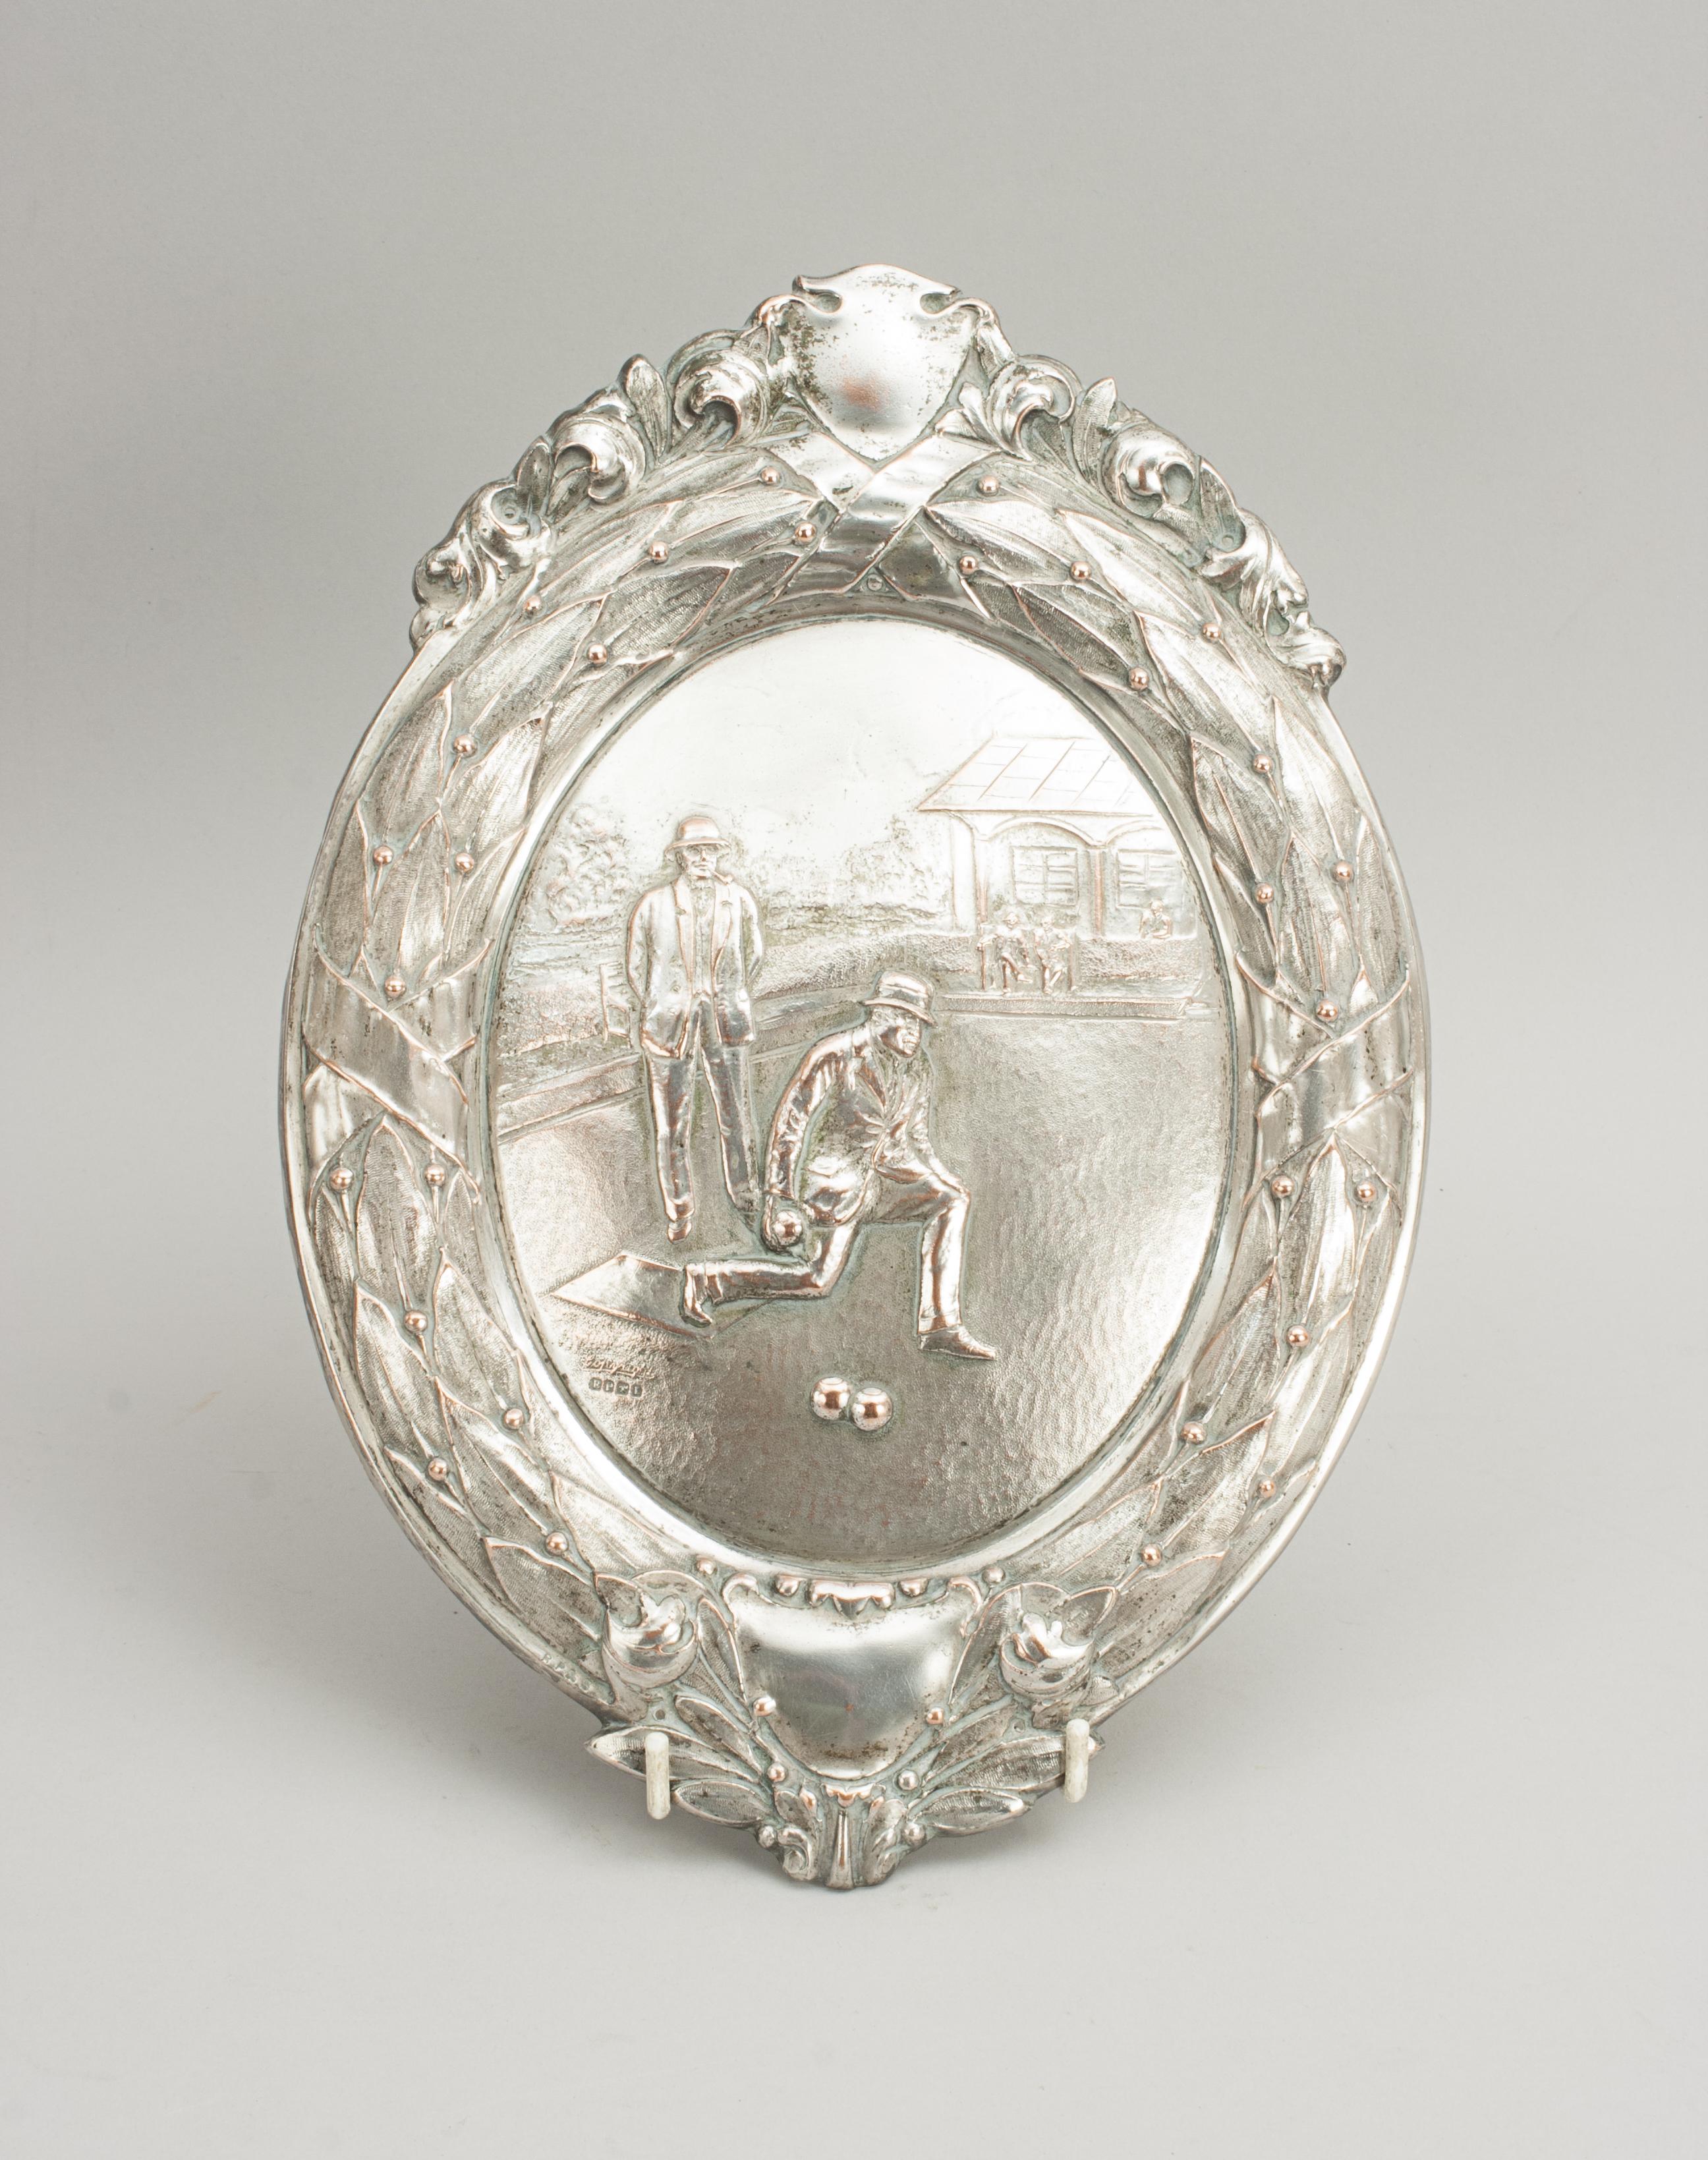 Antique Lawn bowls trophy shield centerpiece.
A wonderful bowls electroplated metal plaque with decorative sides and ends. This was probably made as a front piece for a larger trophy or shield. The scene engraved on the plaque is of two males